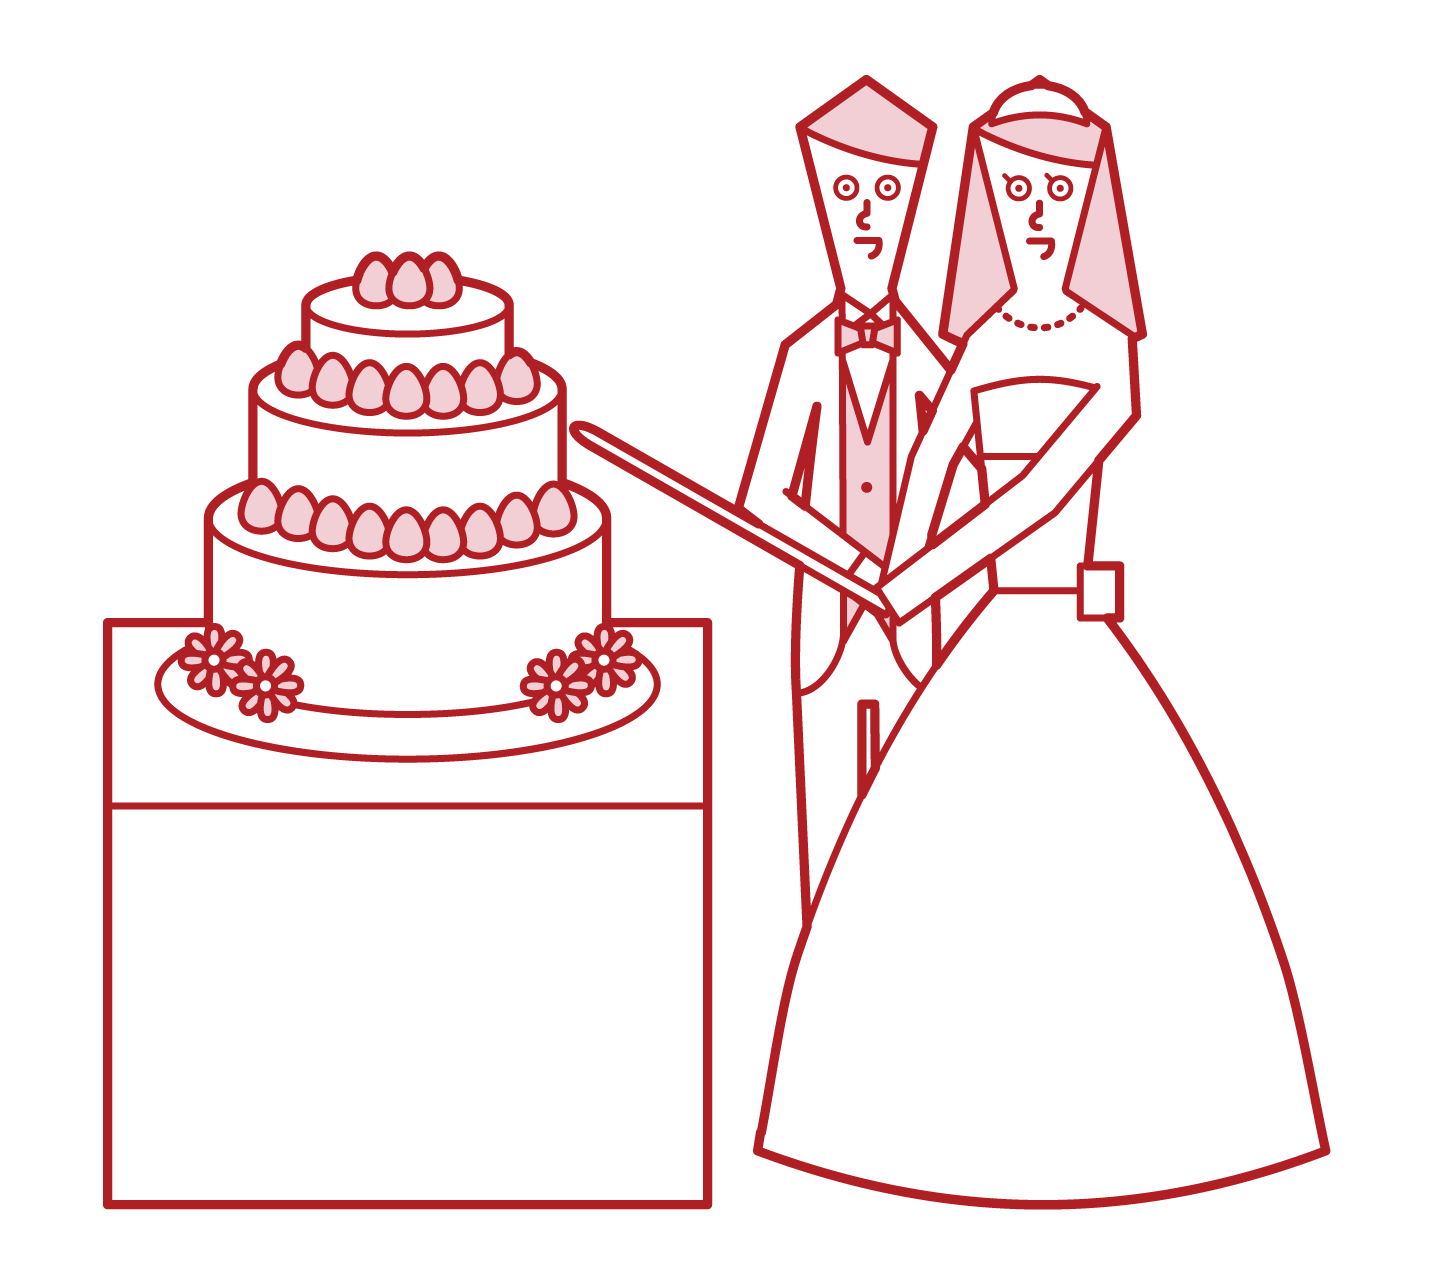 Illustration of bride and groom cutting cake